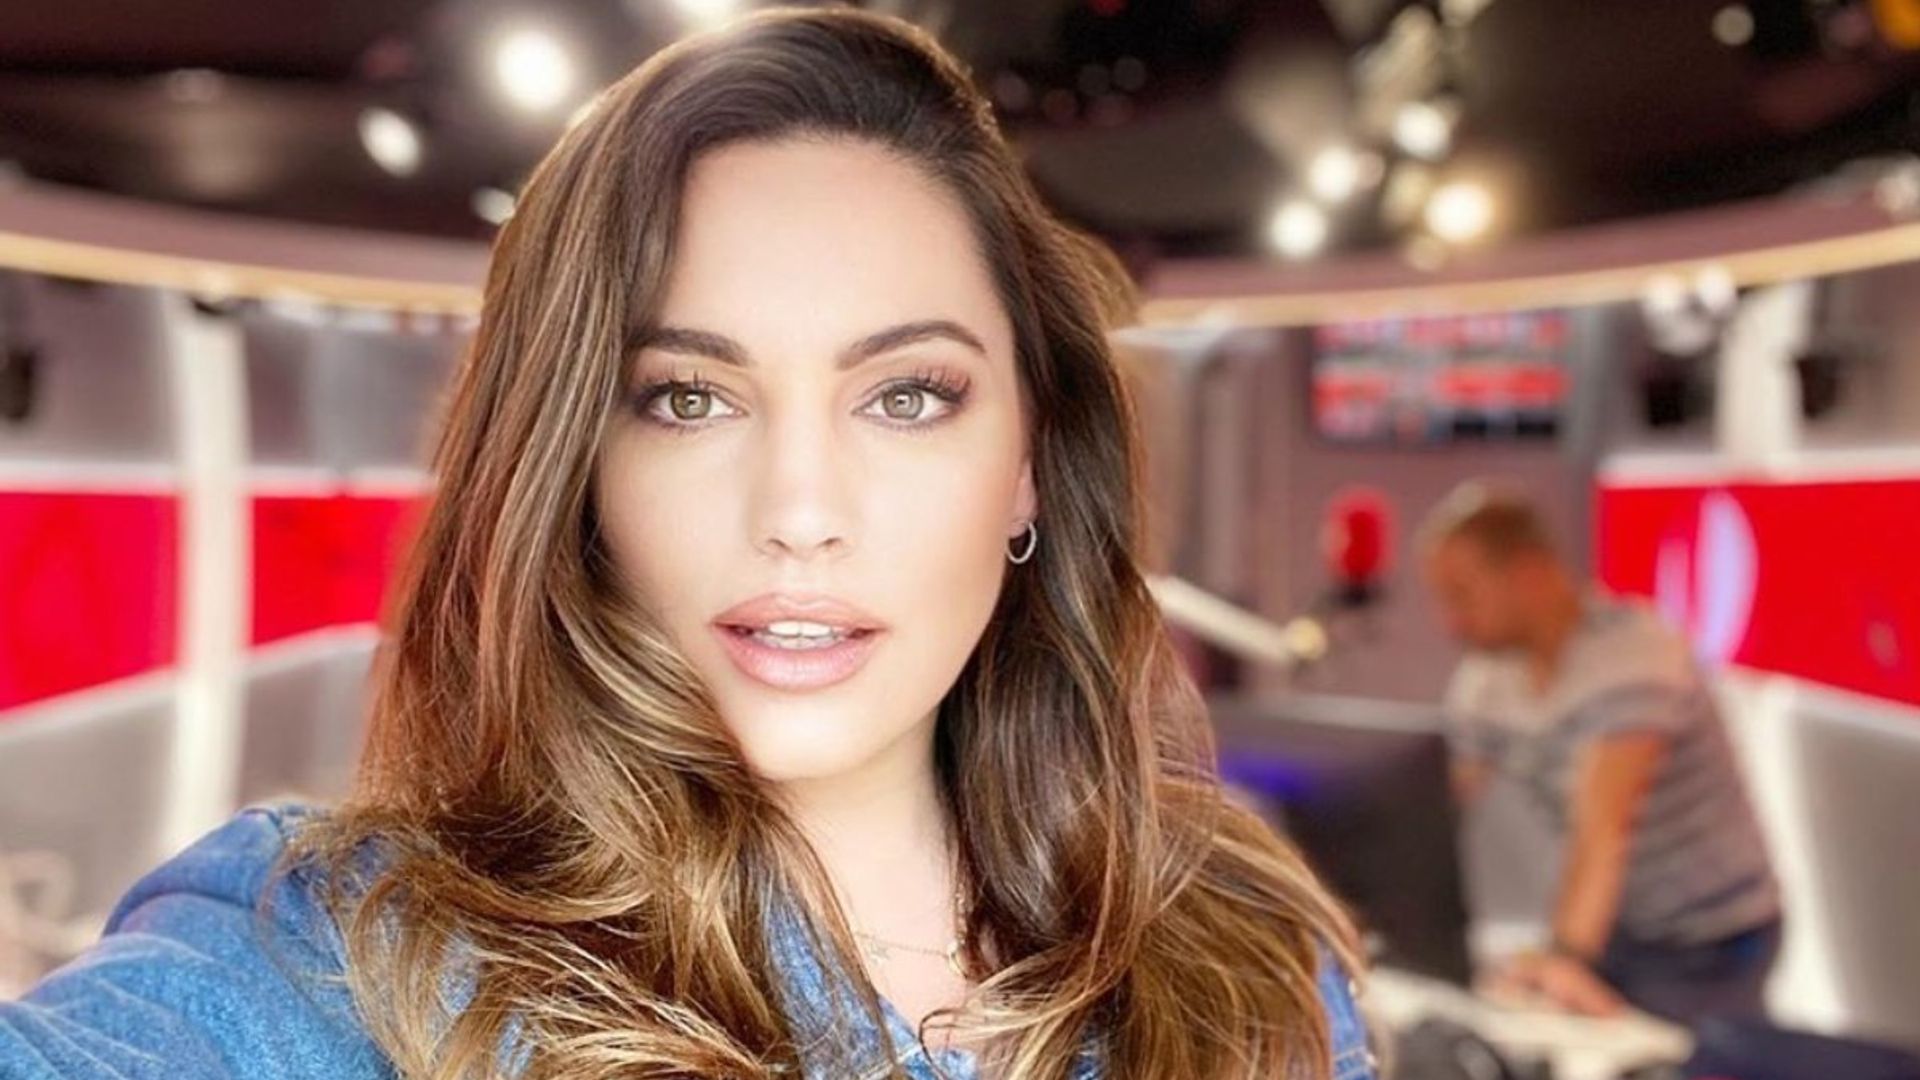 Kelly Brook just put a fresh spin on jeans and a nice top – and fans are obsessed